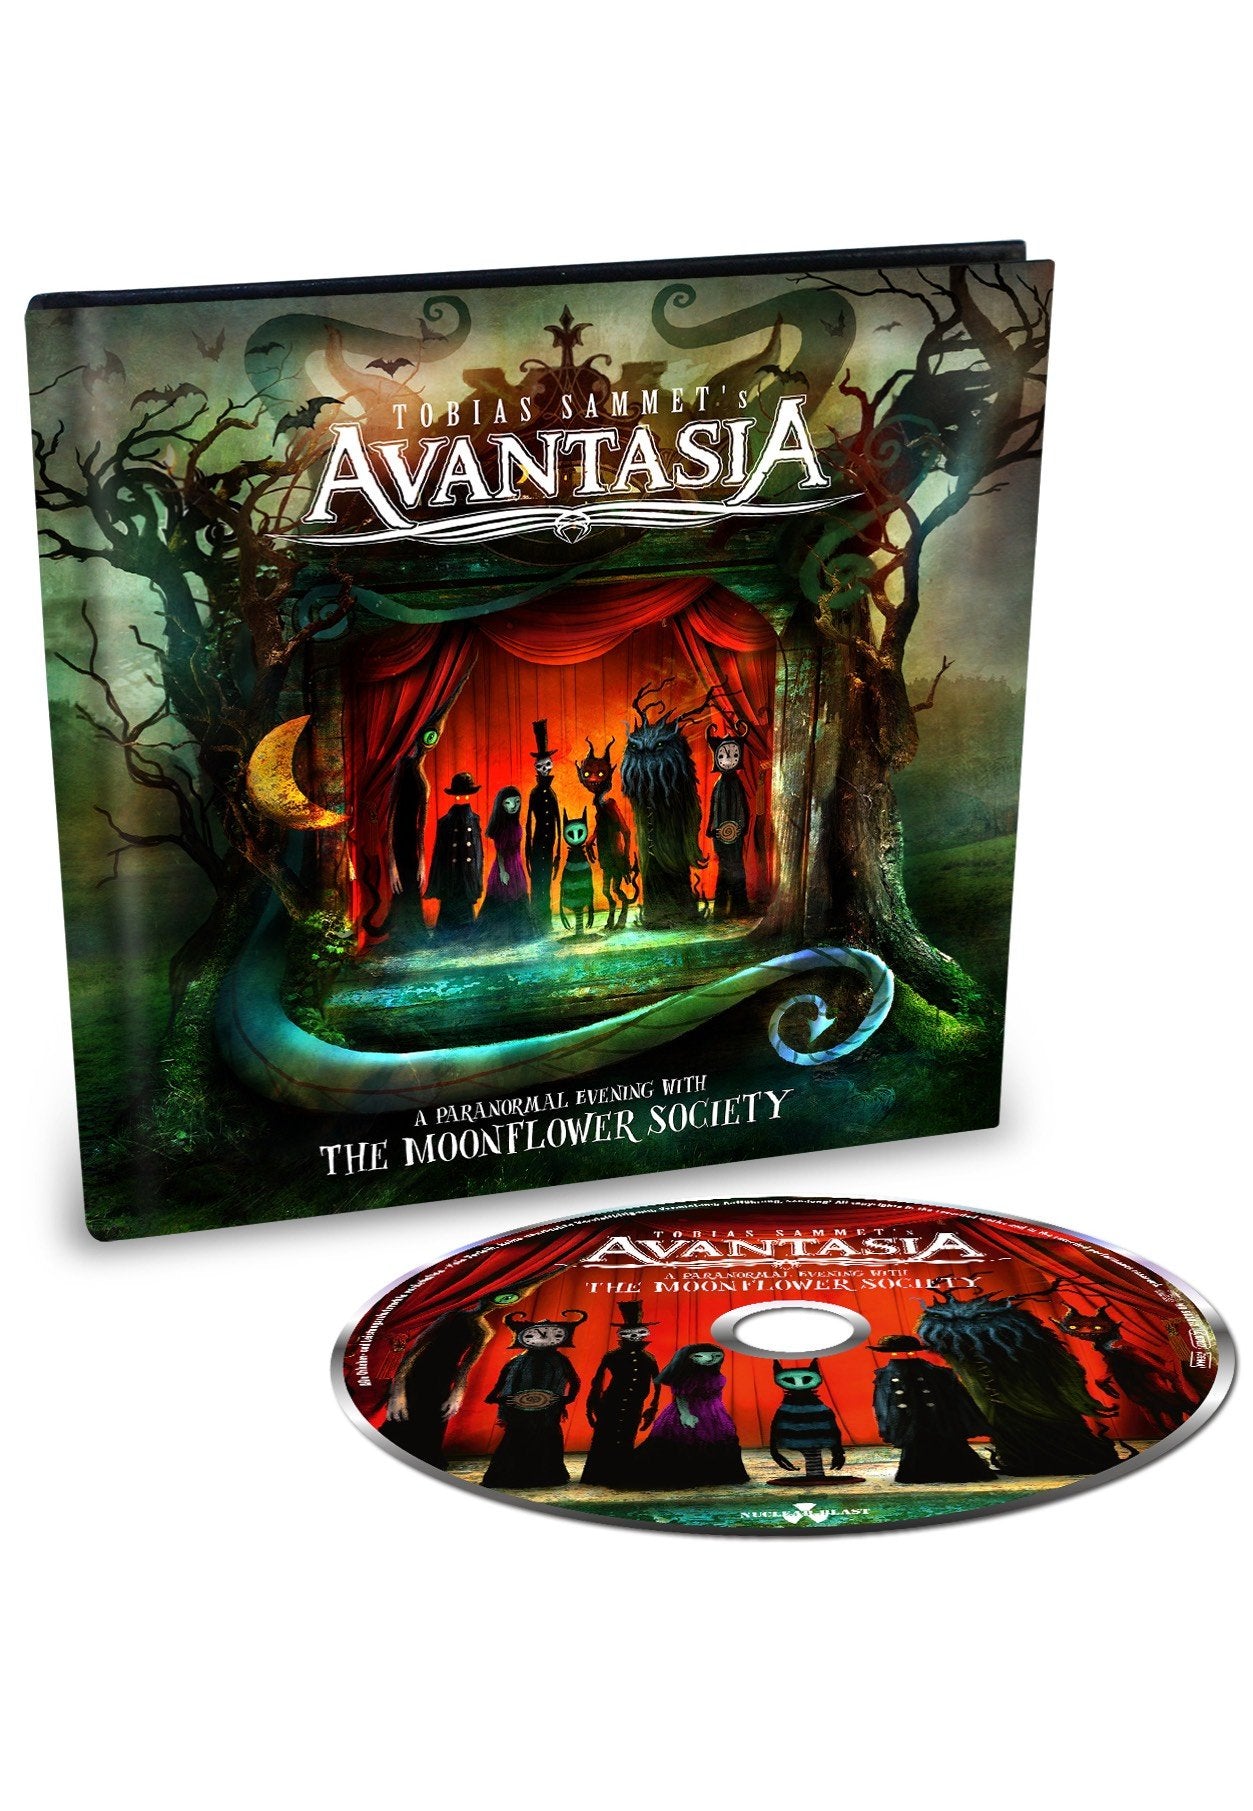 Avantasia - A Paranormal Evening with the Moonflower Society - Mediabook CD